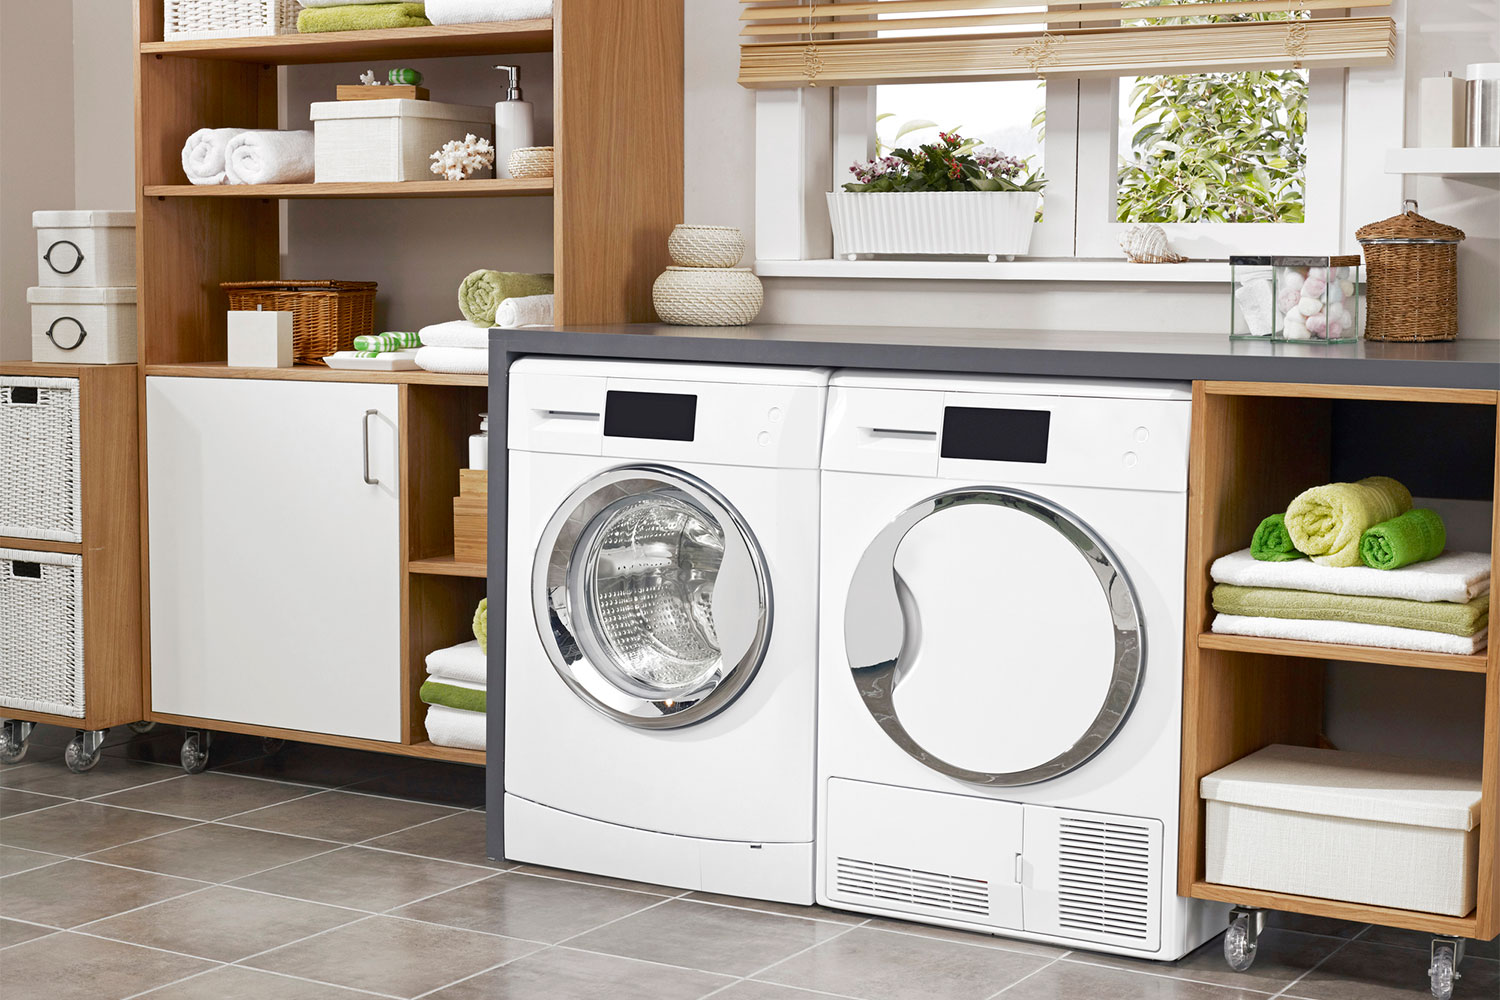 Washer and dryer in a modern clean environment